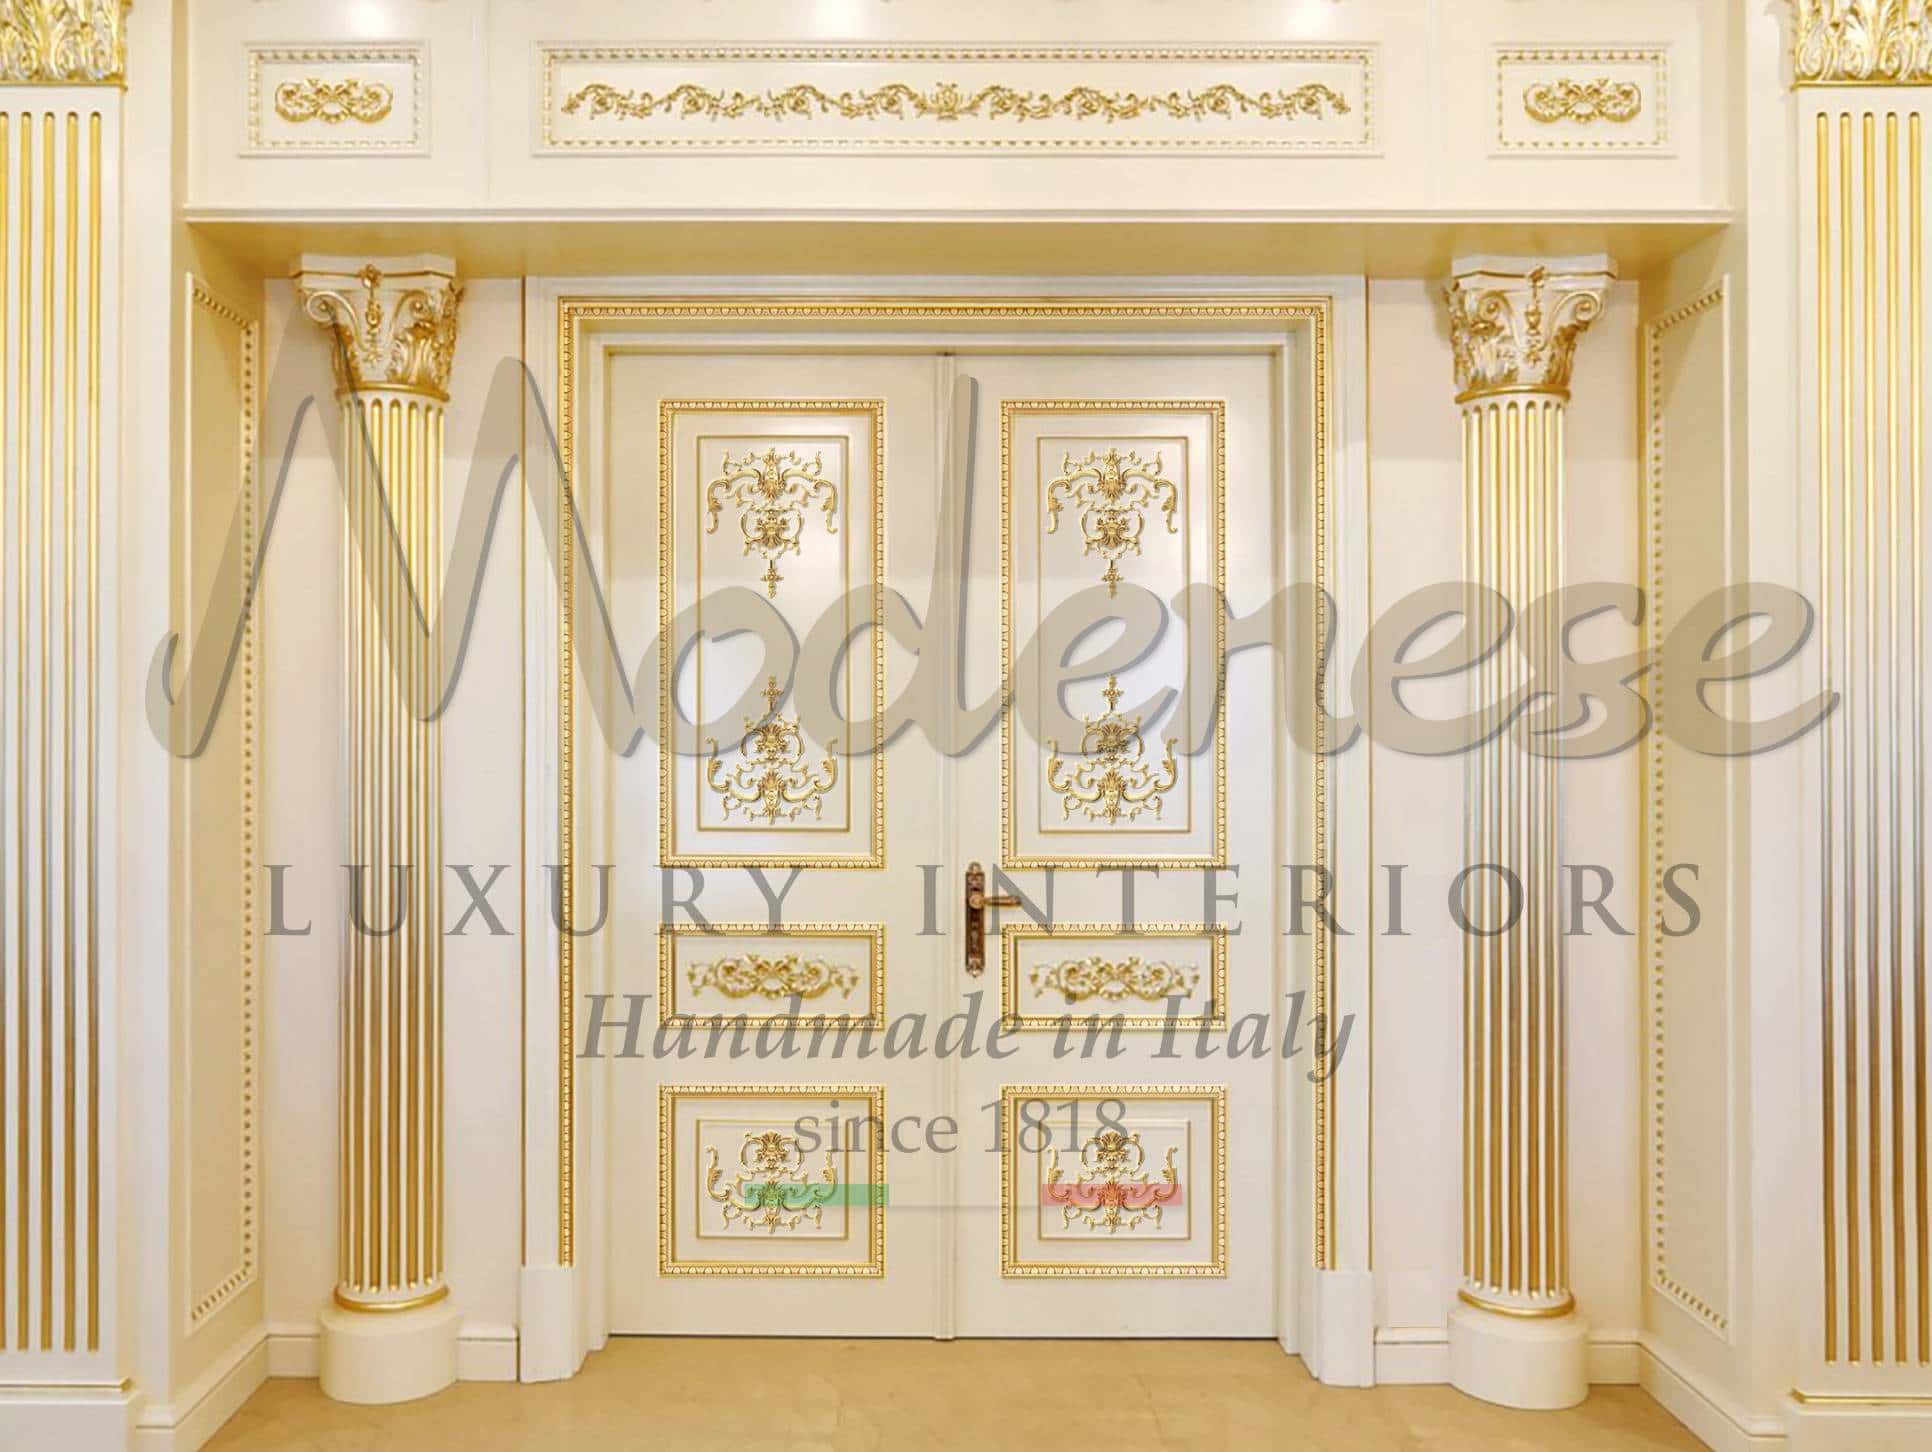 custom made doors design production handcrafted handmade classic luxury golden opulent doors interior fit out home decoration residential villas palaces project consultant